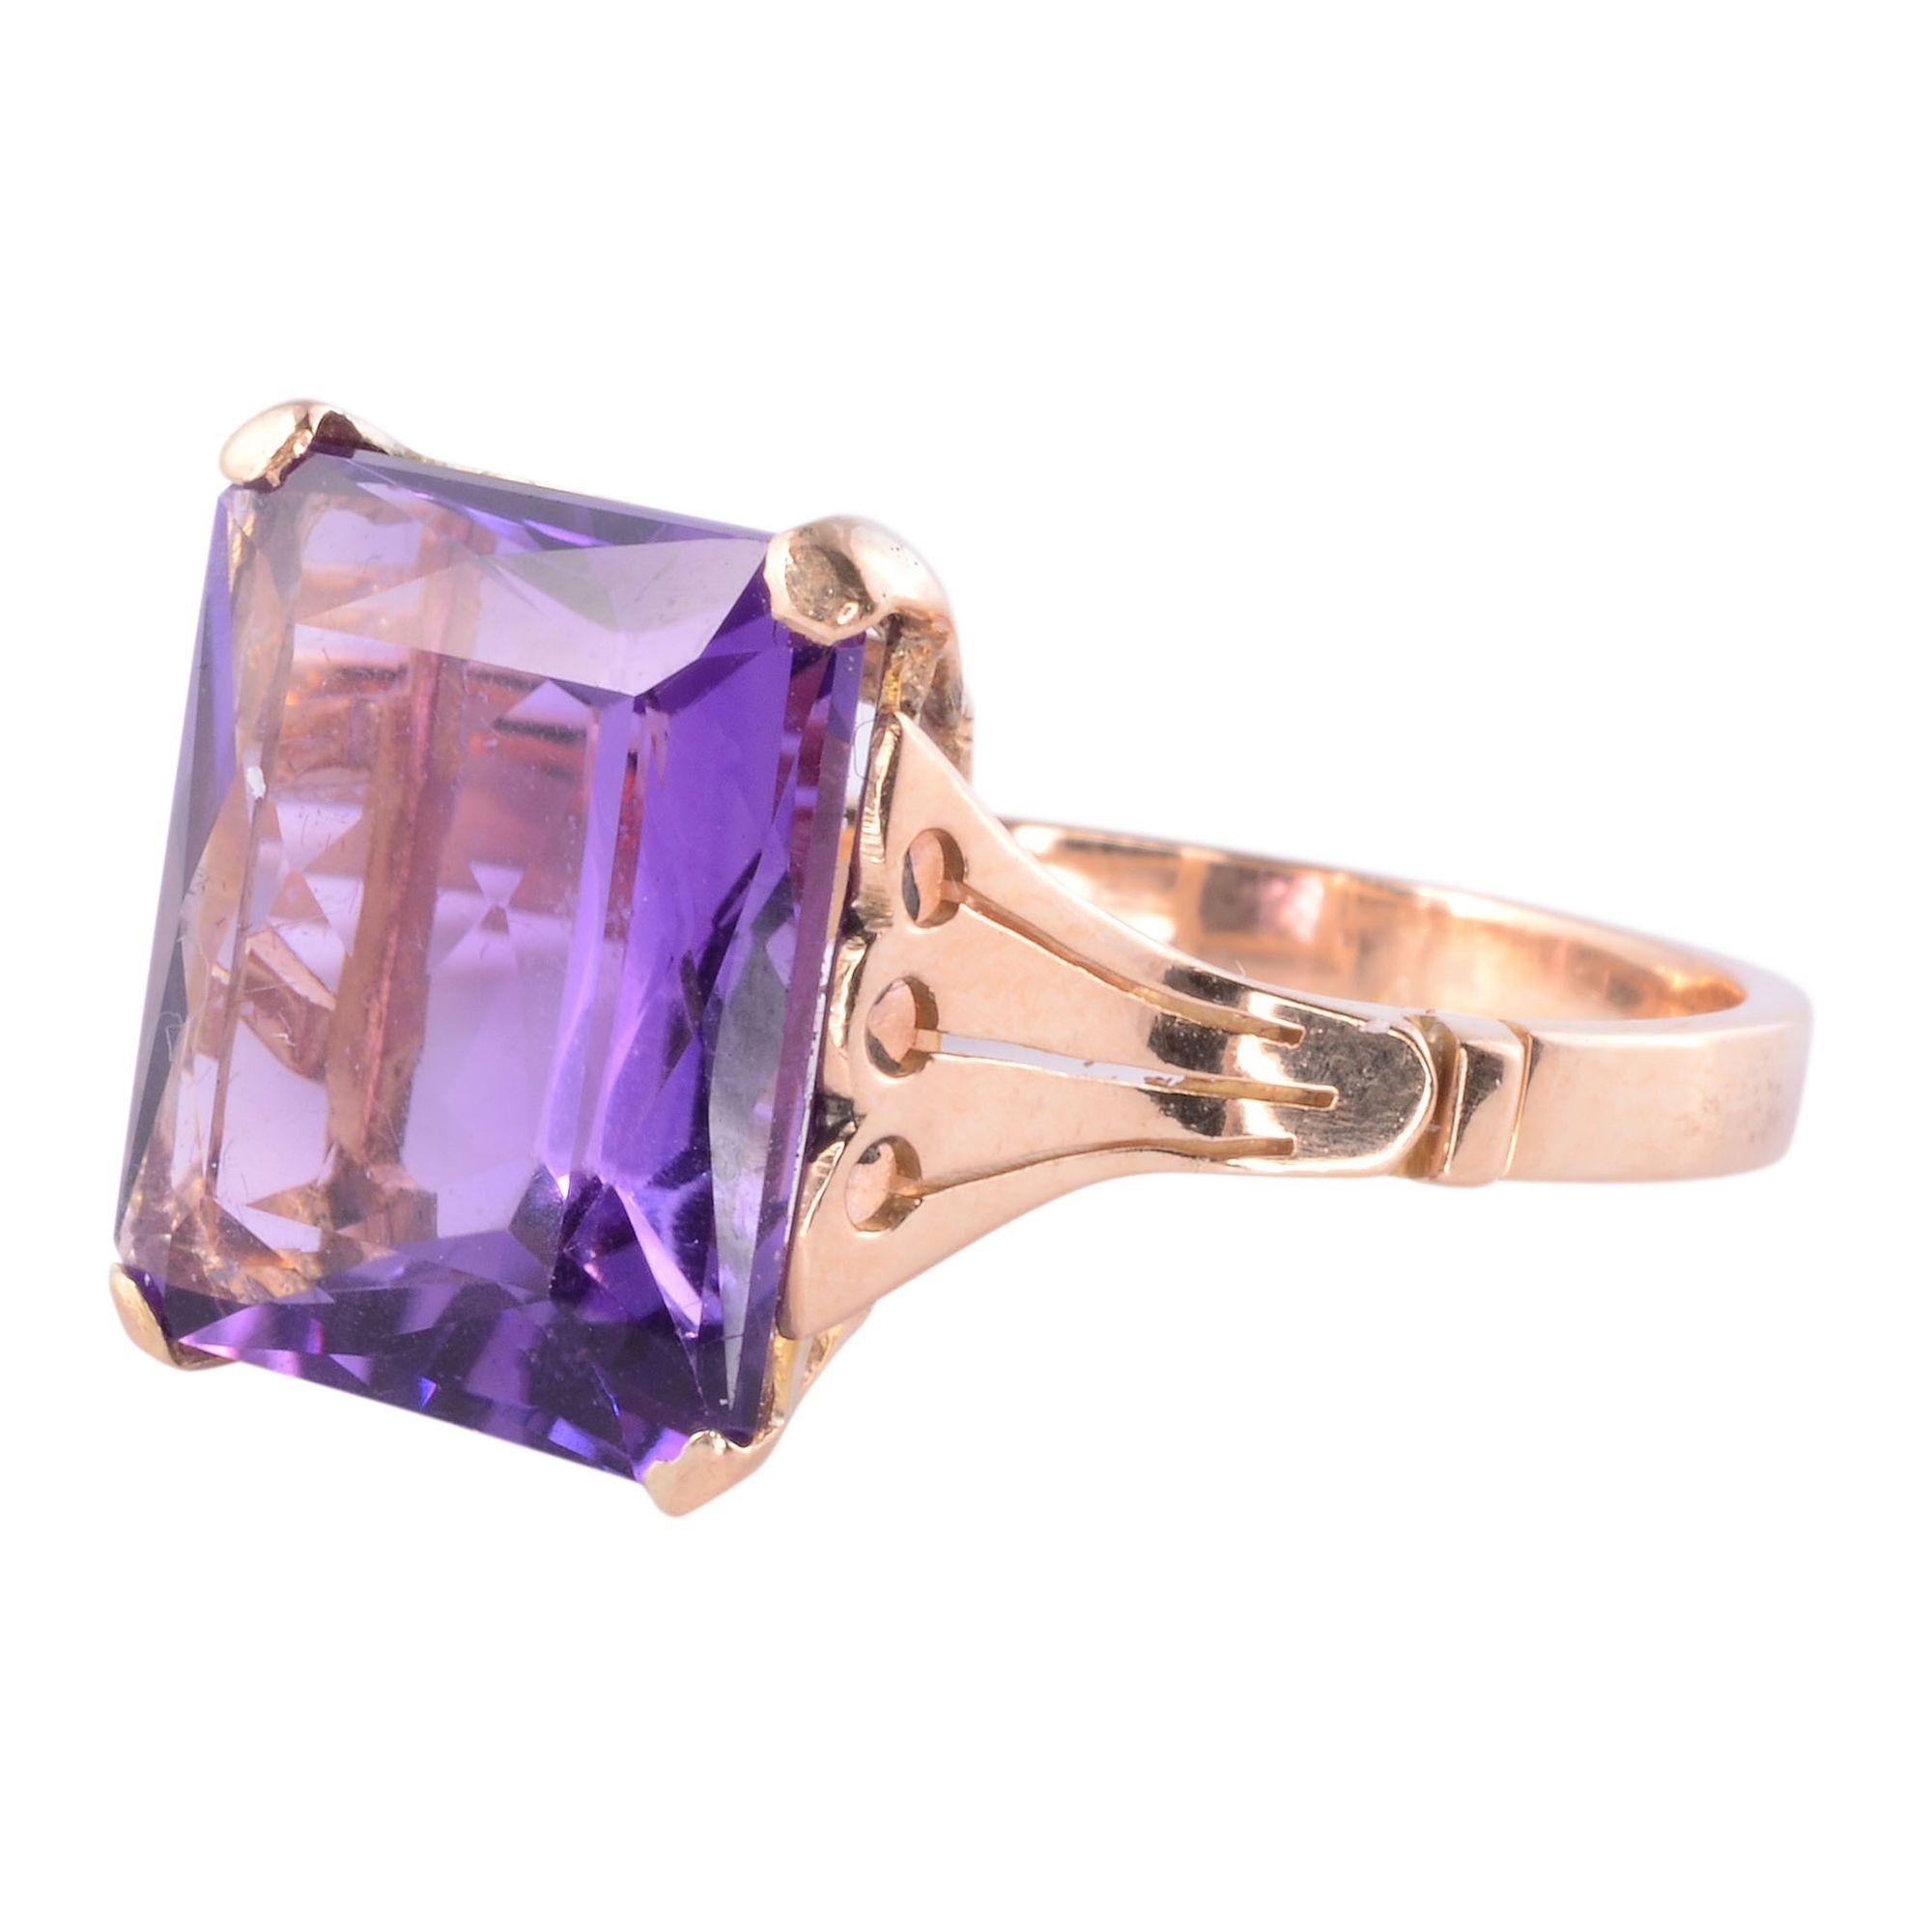 Vintage retro approximately 7.50 carats amethyst ring, circa 1940. This 18 karat retro square cut amethyst ring is size 9.5. [KIMH 457]

*Resizing available for additional charge.